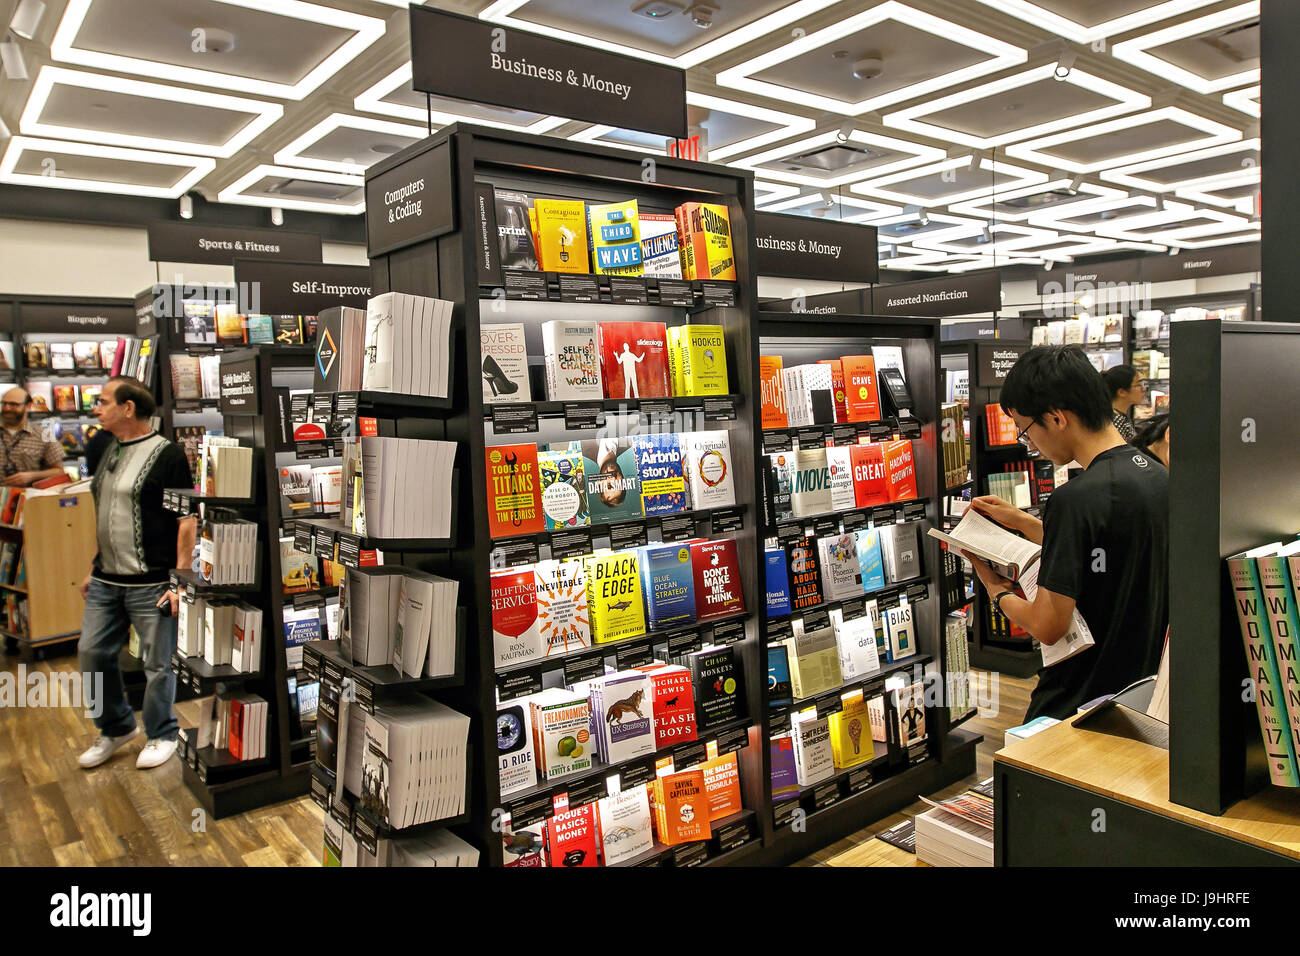 A Newly Opened Store High Resolution Stock Photography and Images - Alamy